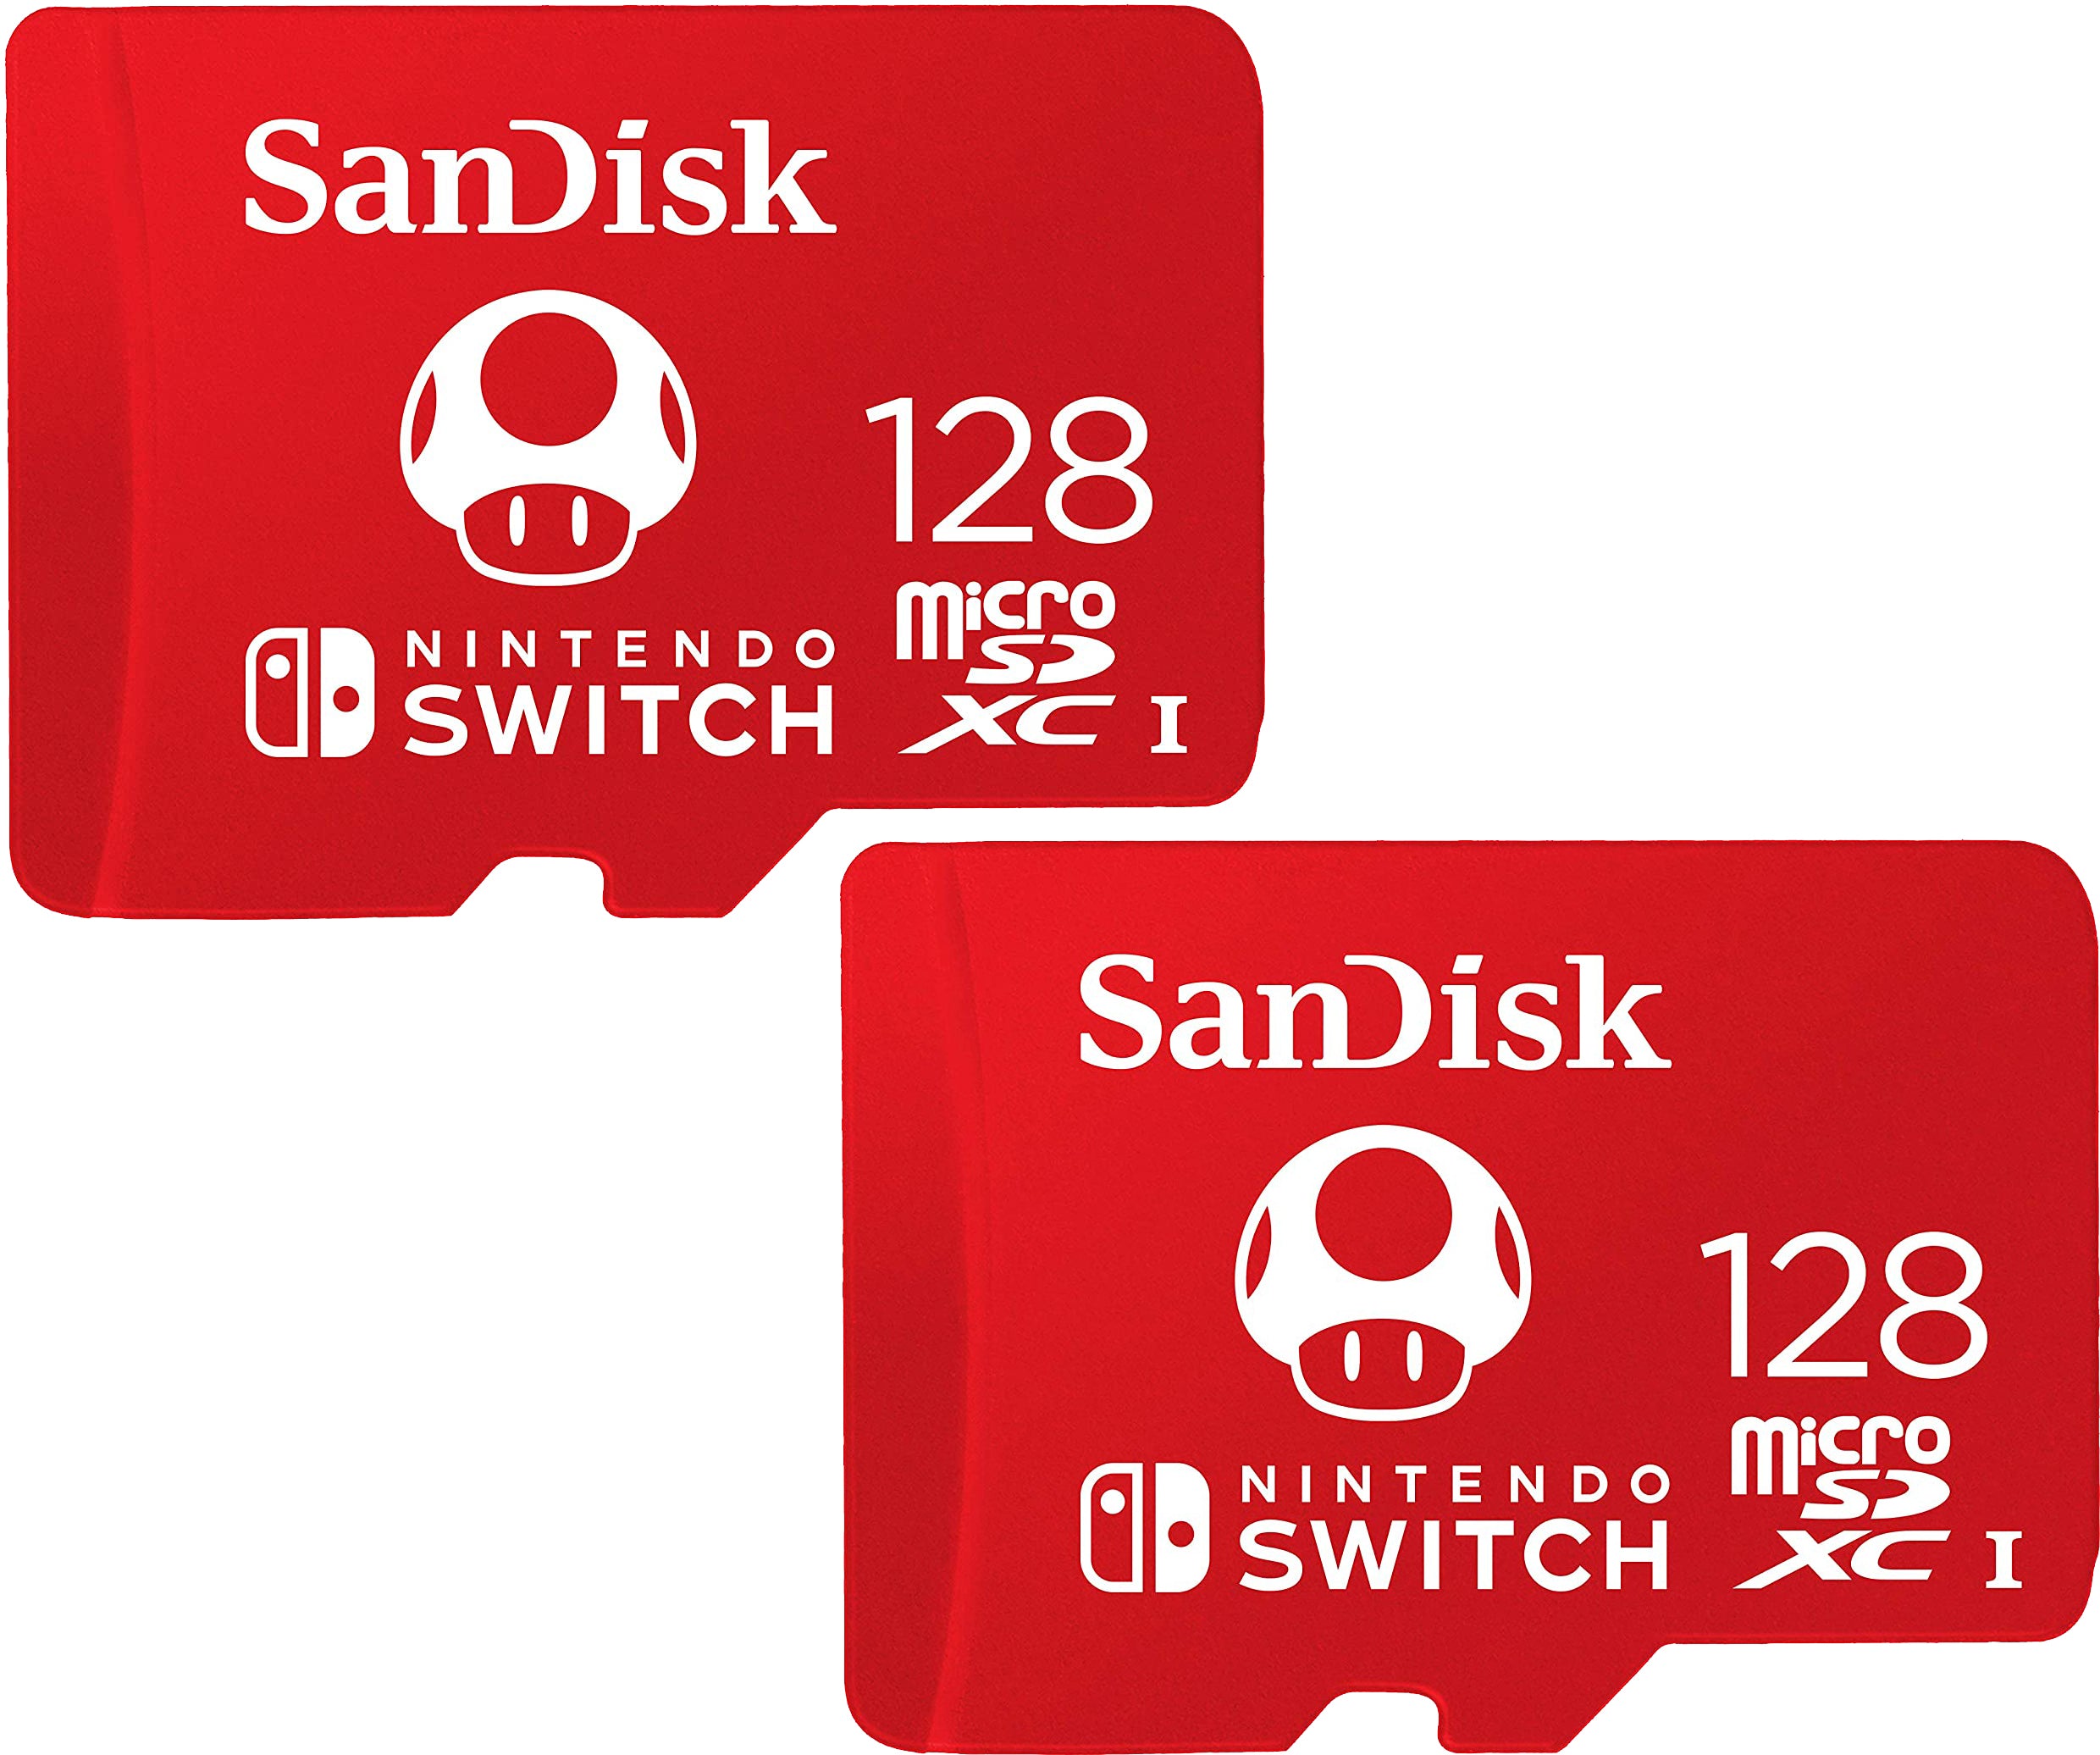 Sandisk 128GB Micro SD Card for Nintendo Switch Overview 